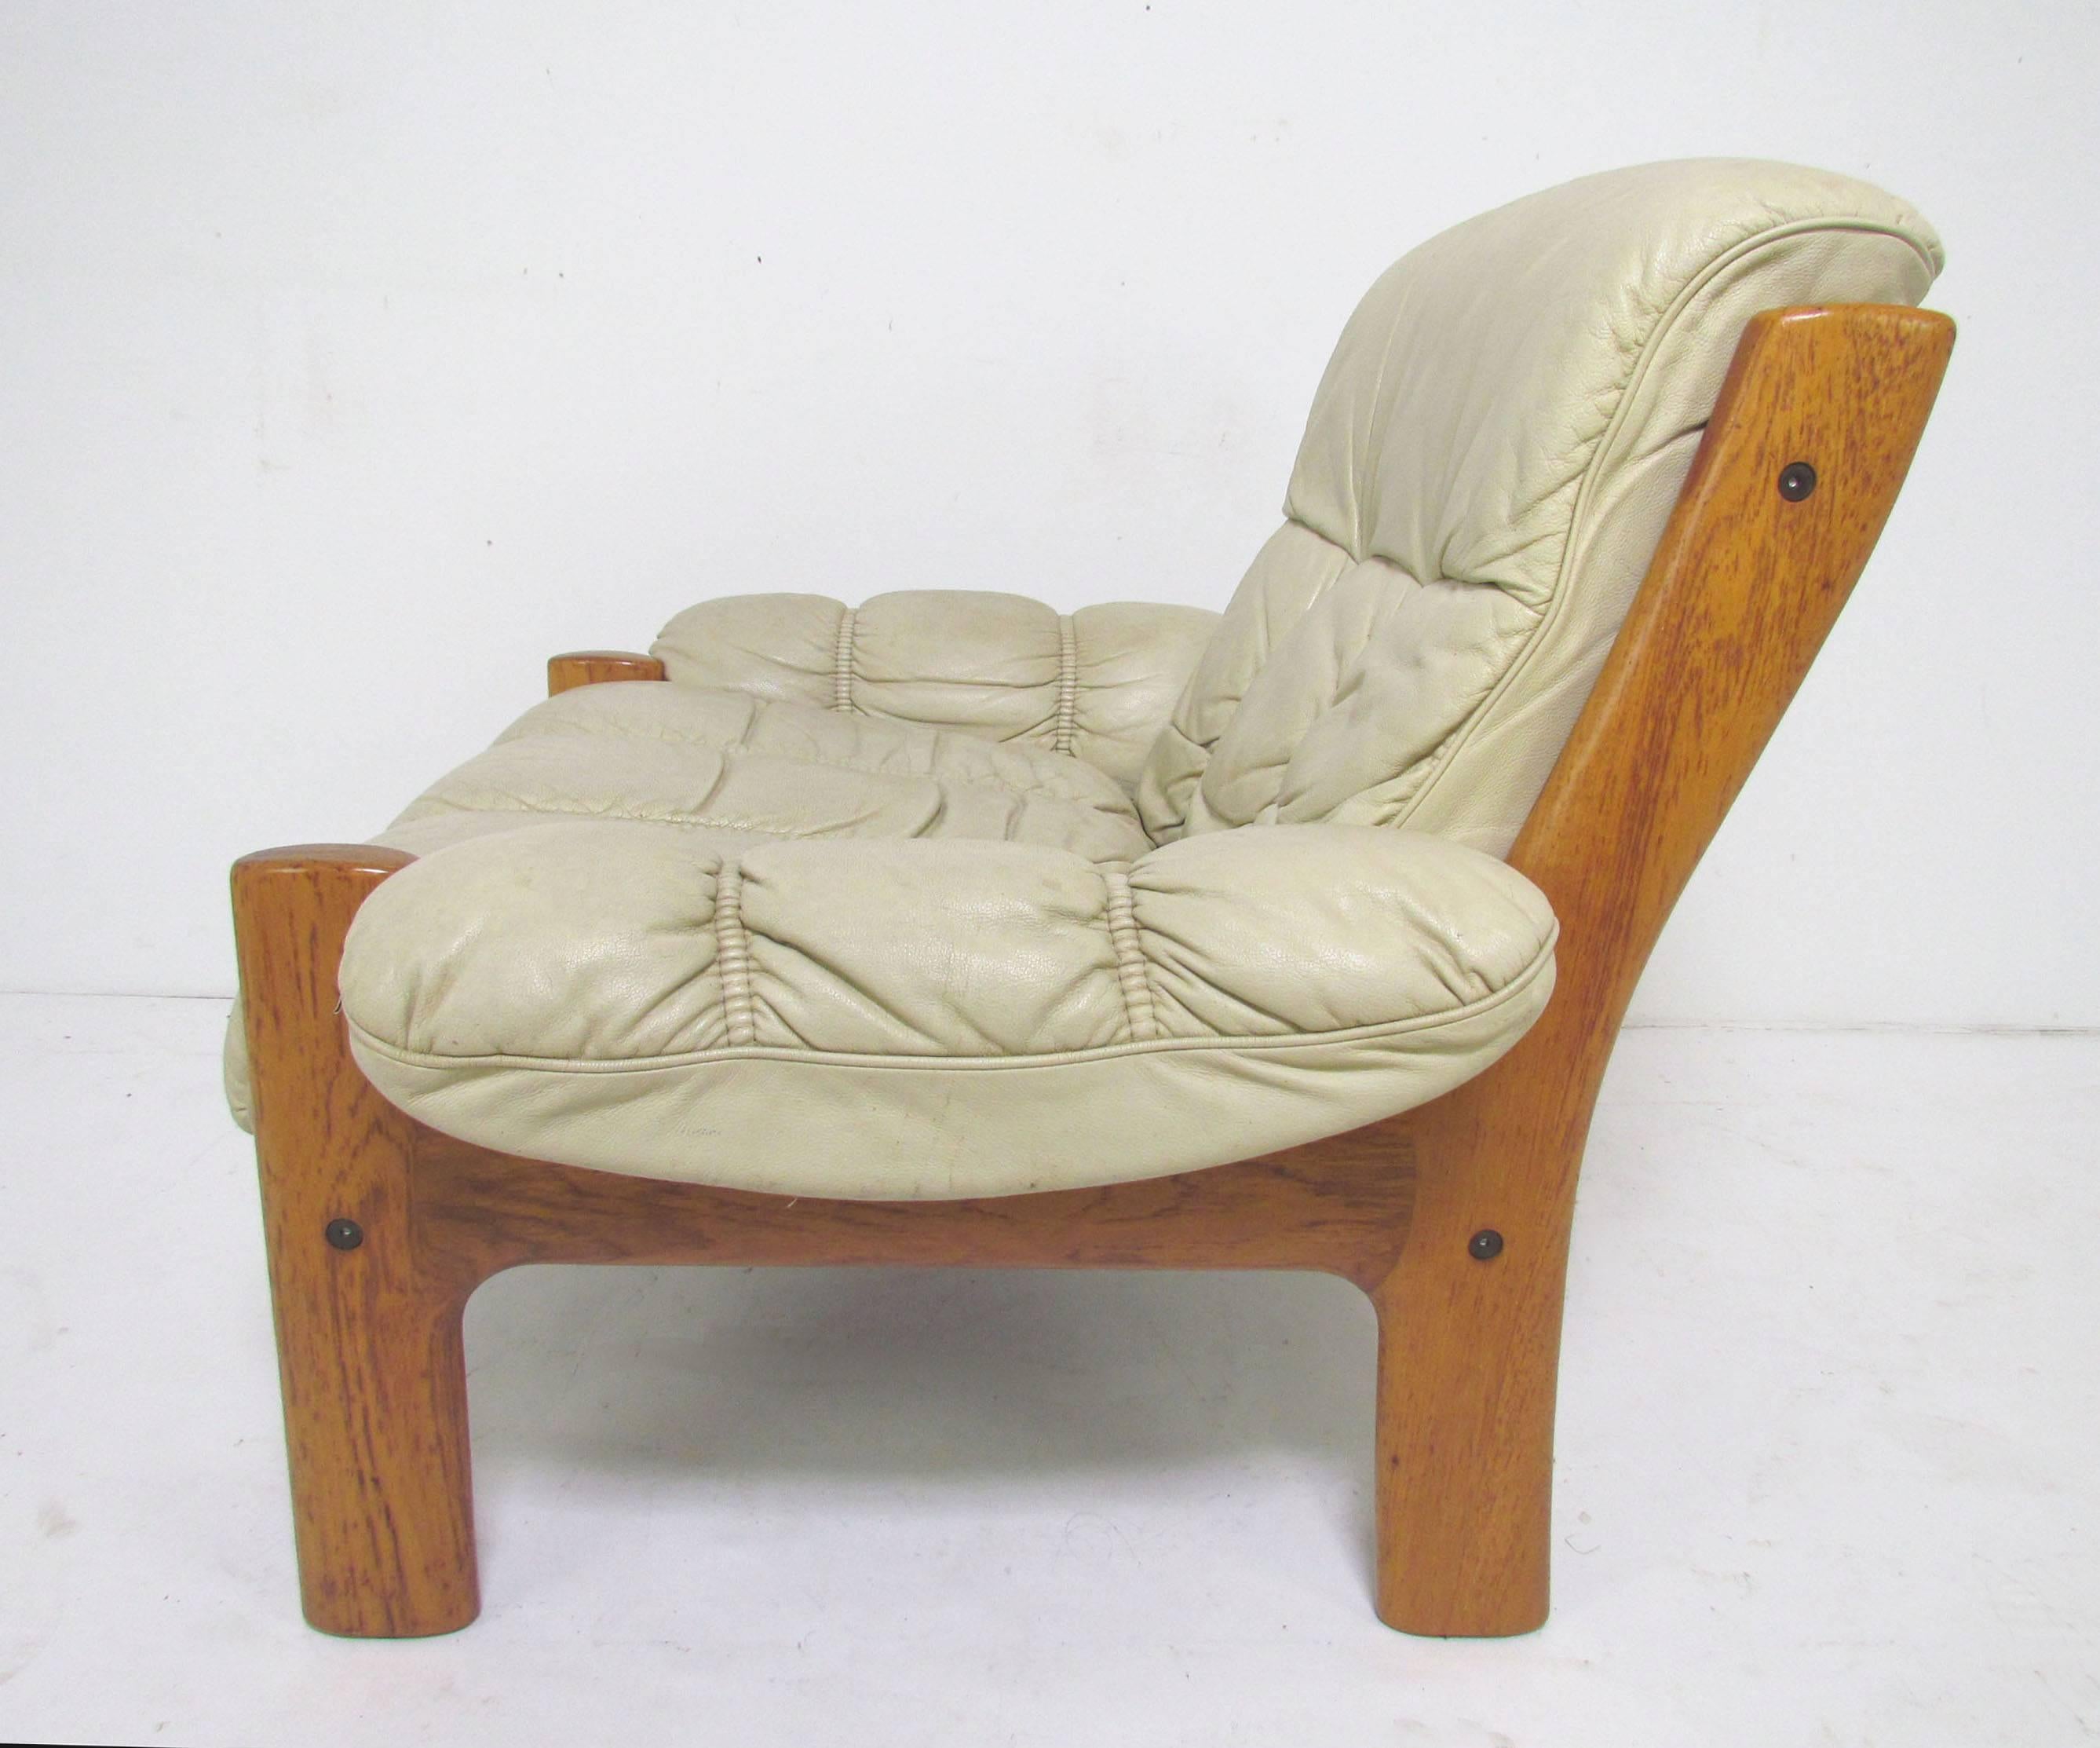 Oversize lounge chair, teak frame with original leather upholstery, by J.E. Ekornes, Norway, circa 1970s.